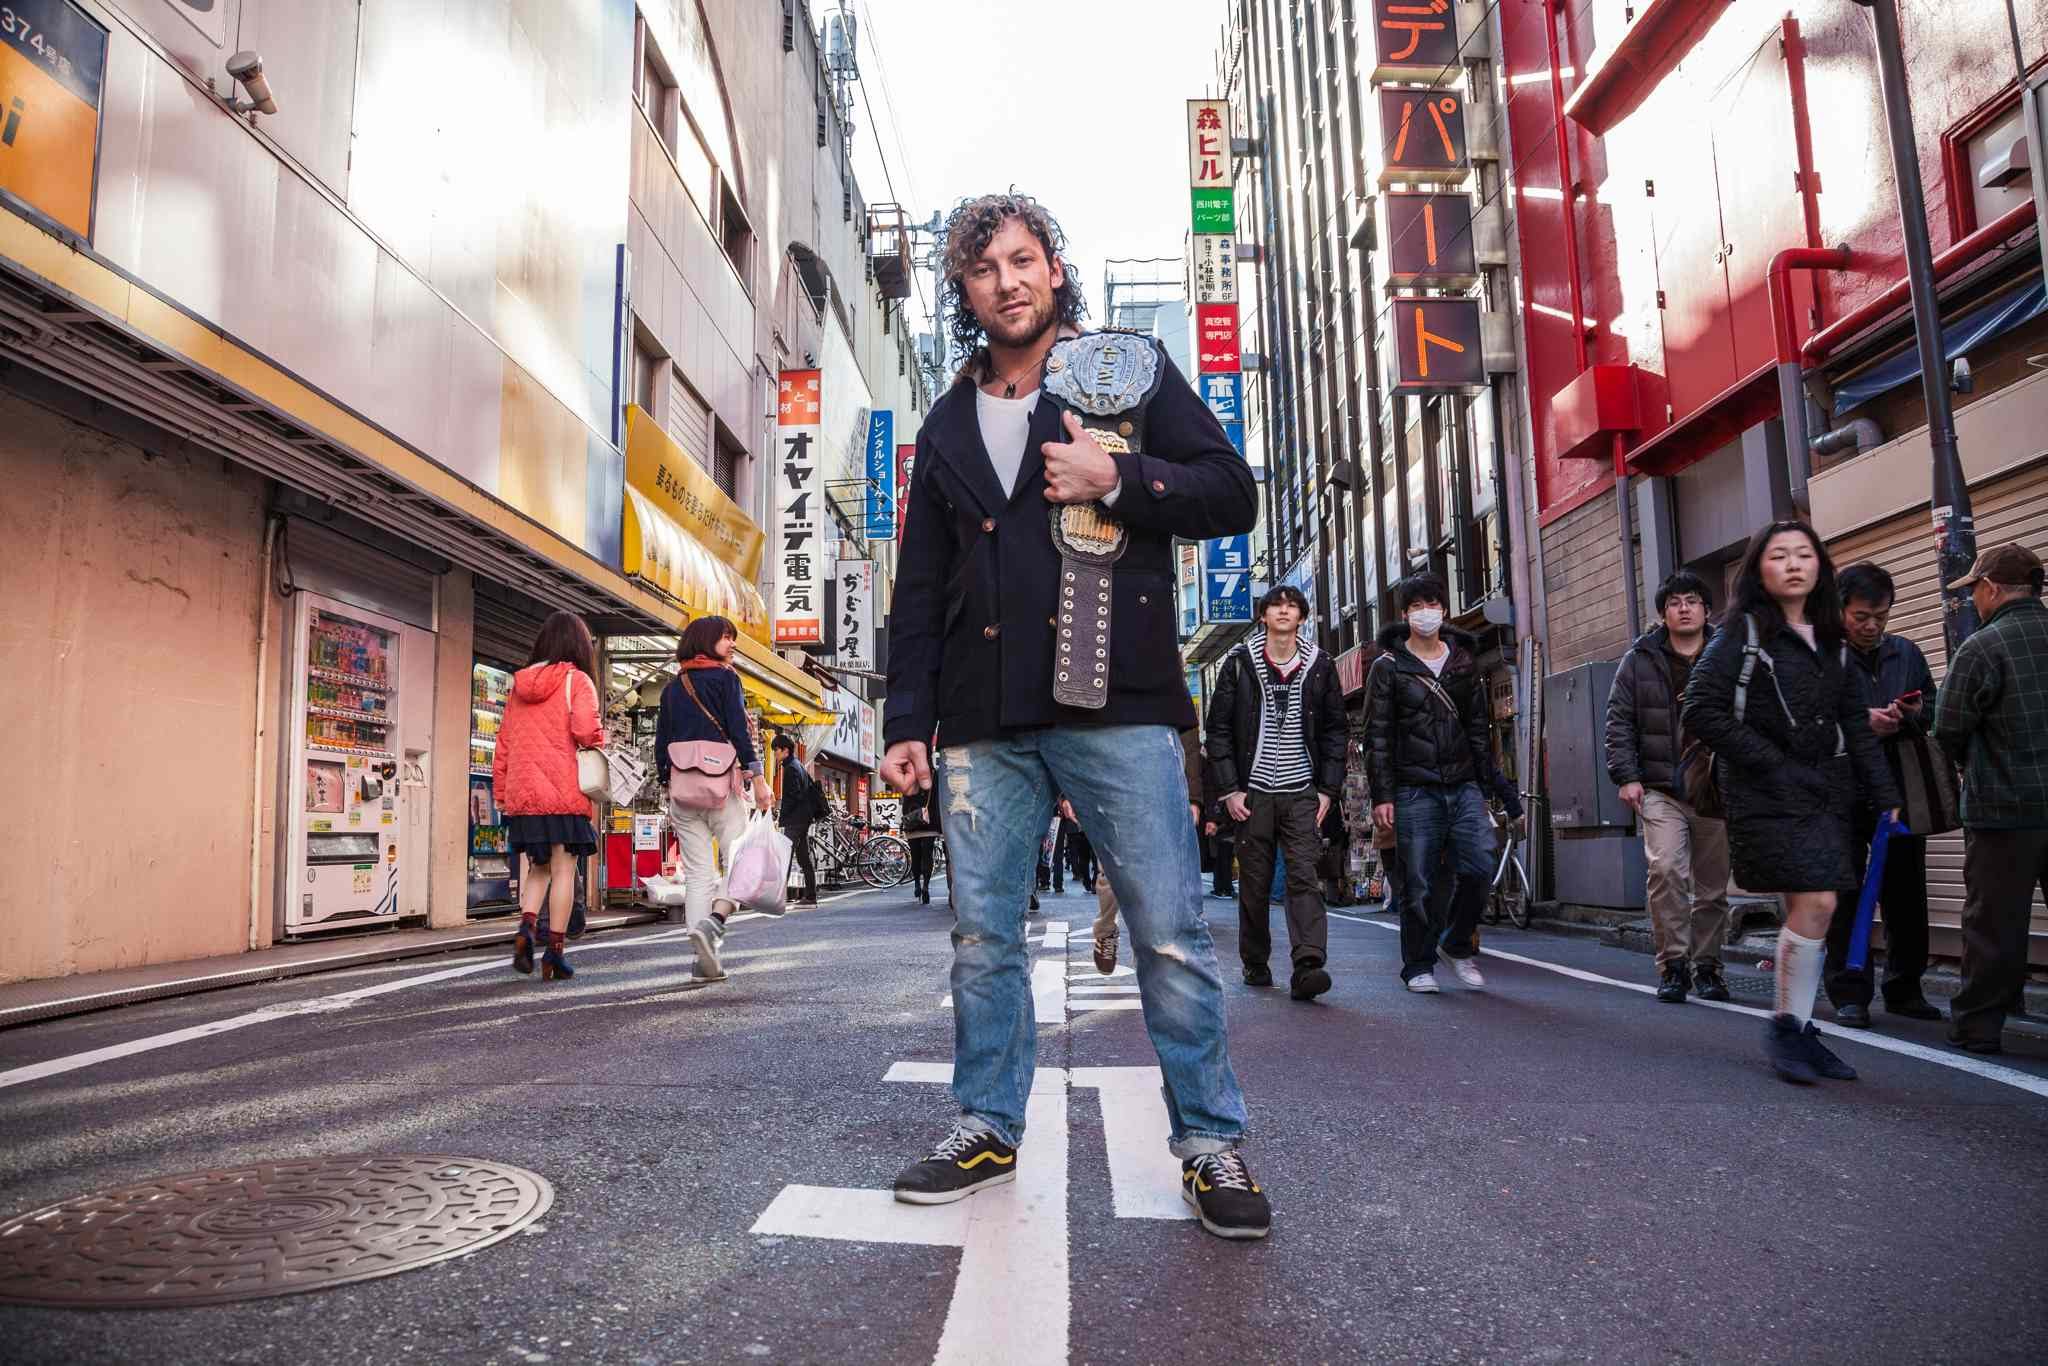 The Man In Japan: Kenny Omega's Road To The Tokyo Dome, pt. 3